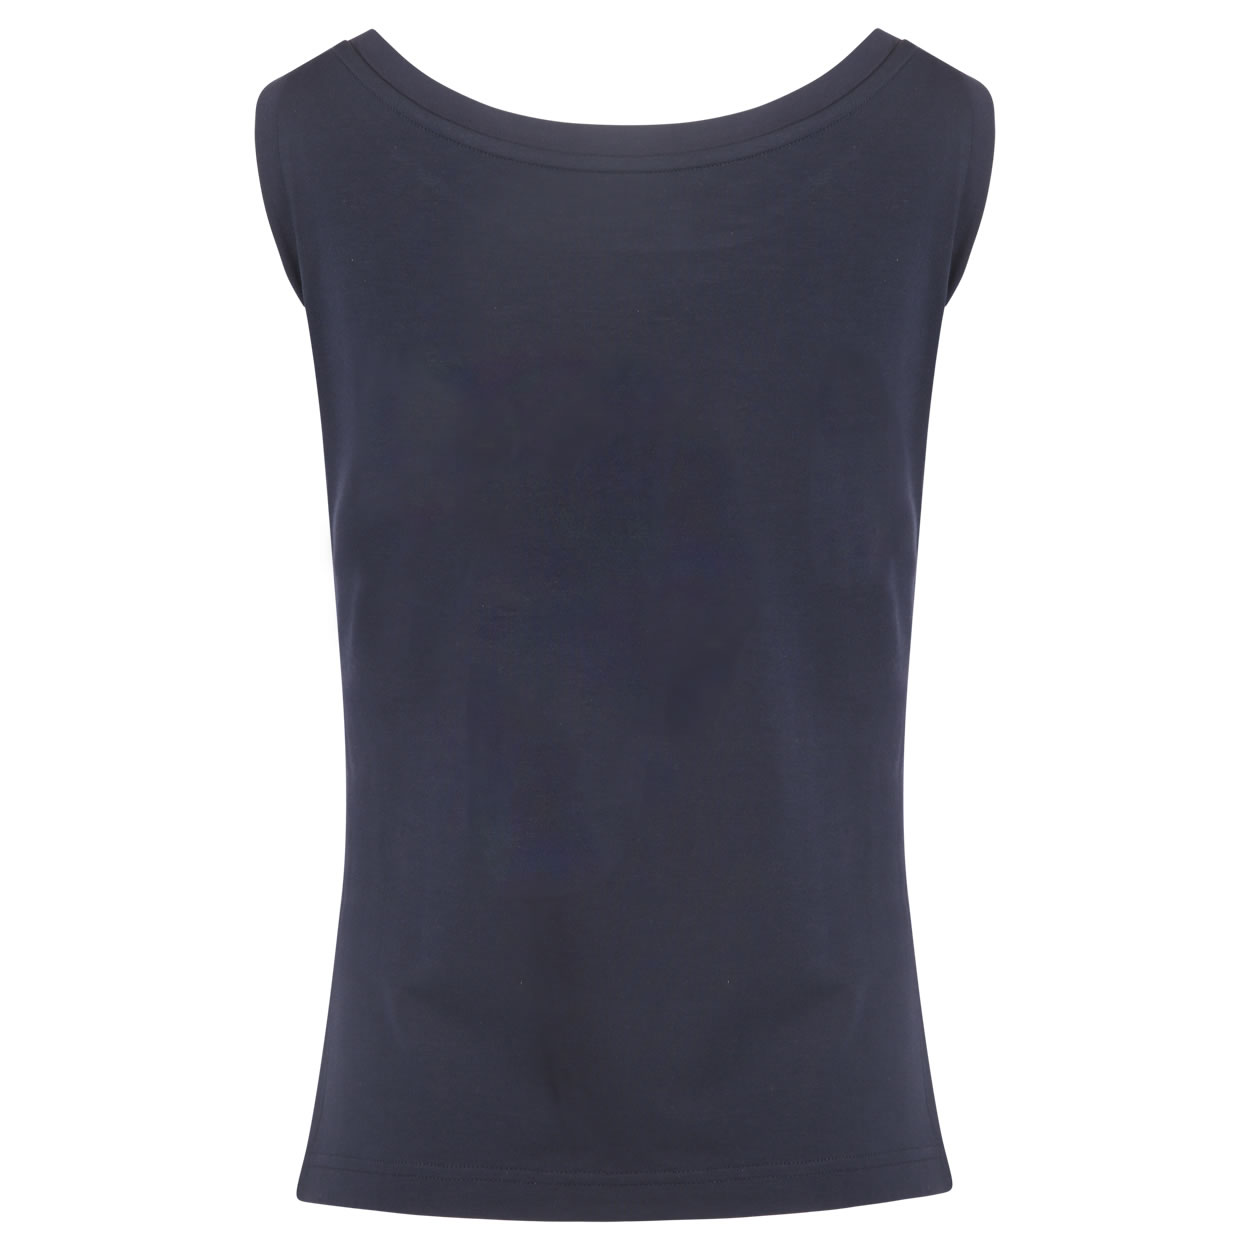 Luxe Top - midnight blue